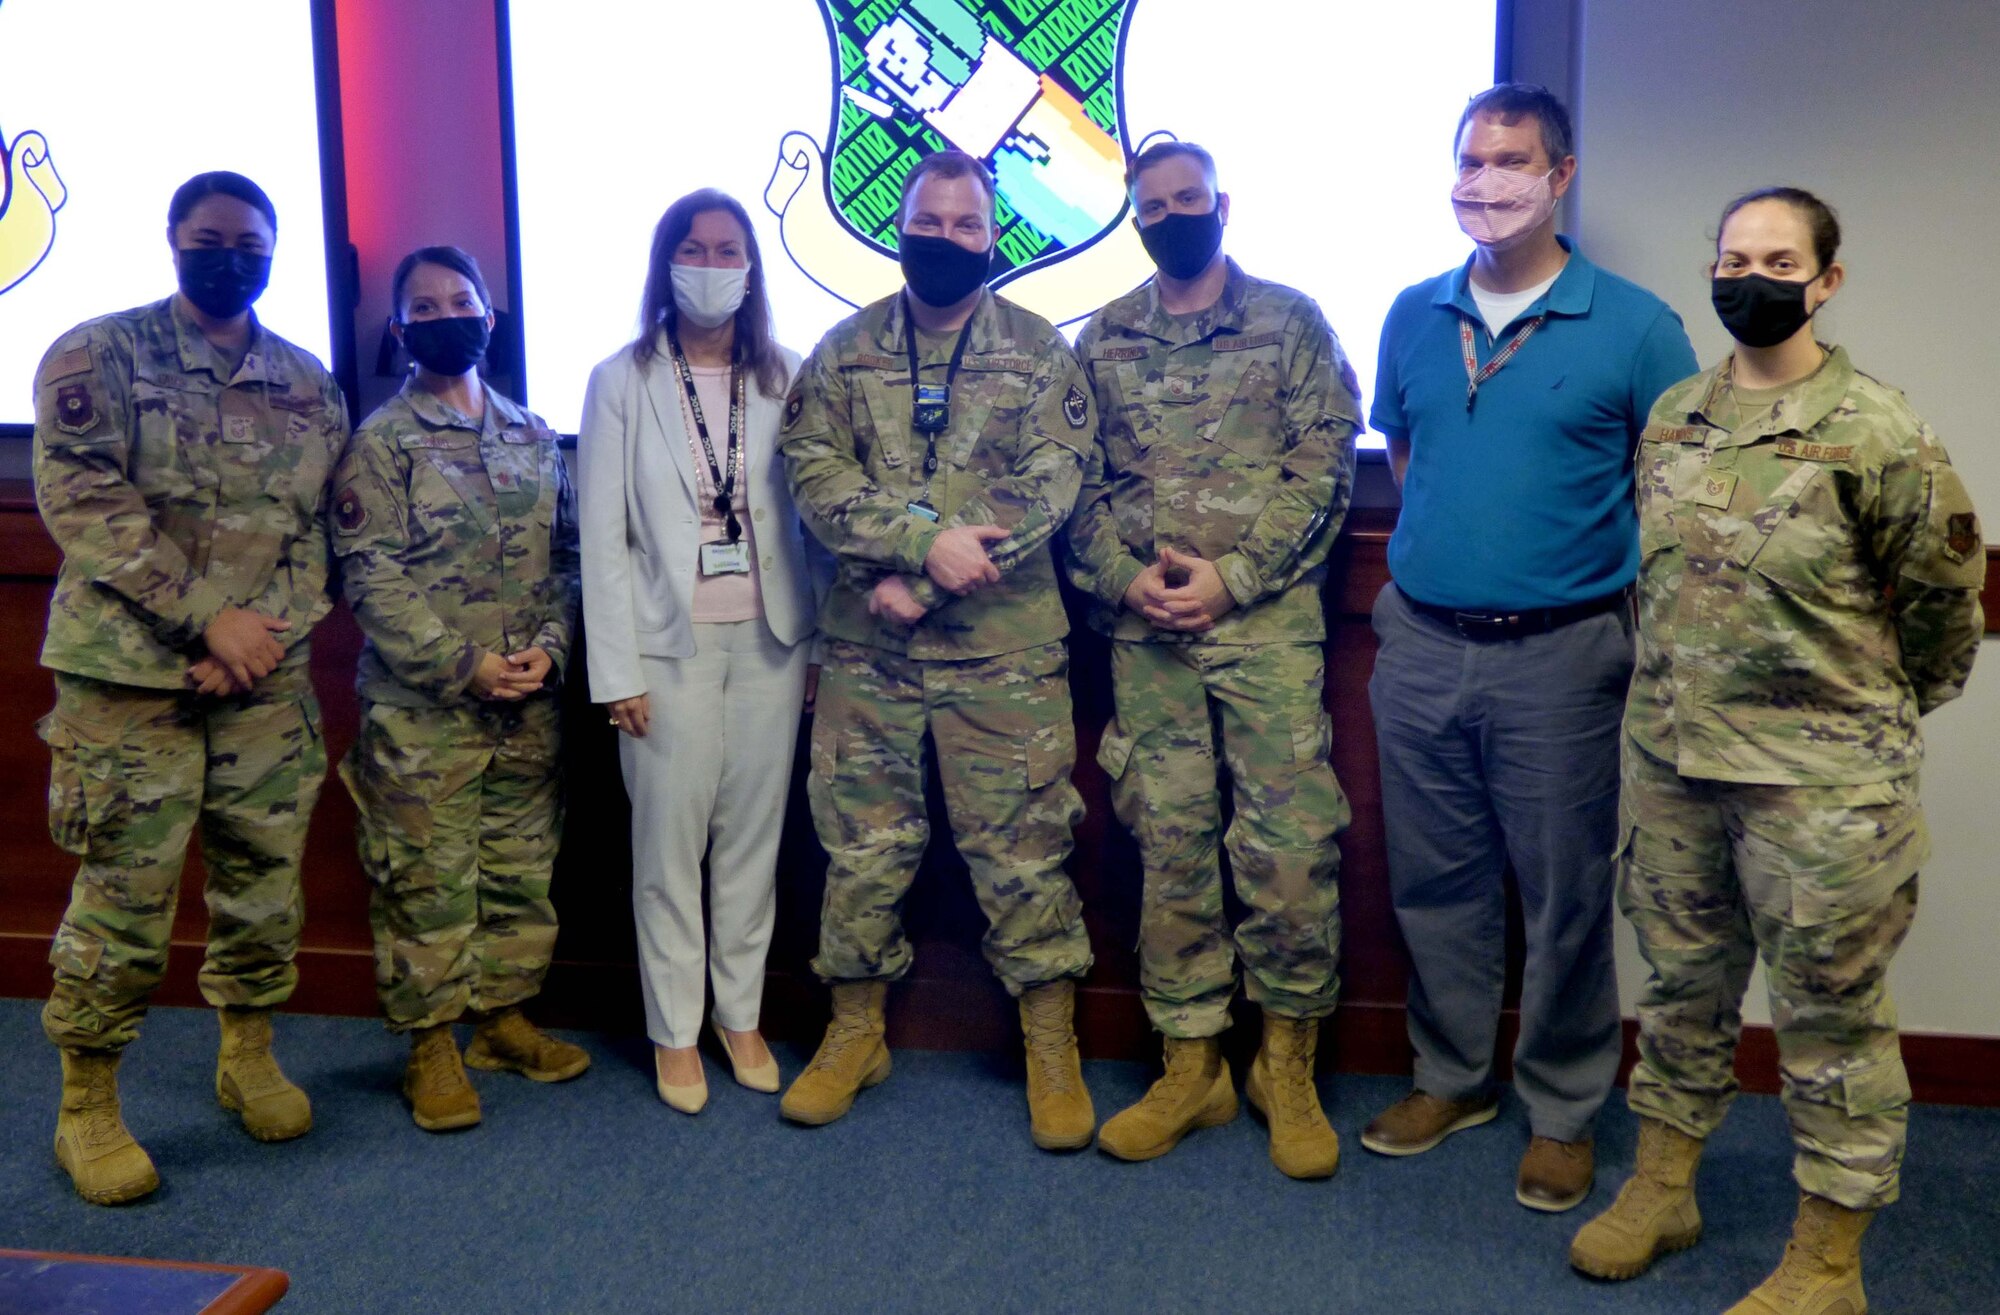 Organizers of Air Force Special Operations Command's Mission Defense Conference pose for a photo at Hurlburt Field, Fla., Feb. 5, 2021. The conference focused on identifying the organic cyber capabilities needed to protect missions against threats in, through, and from cyberspace. (Courtesy Photo)